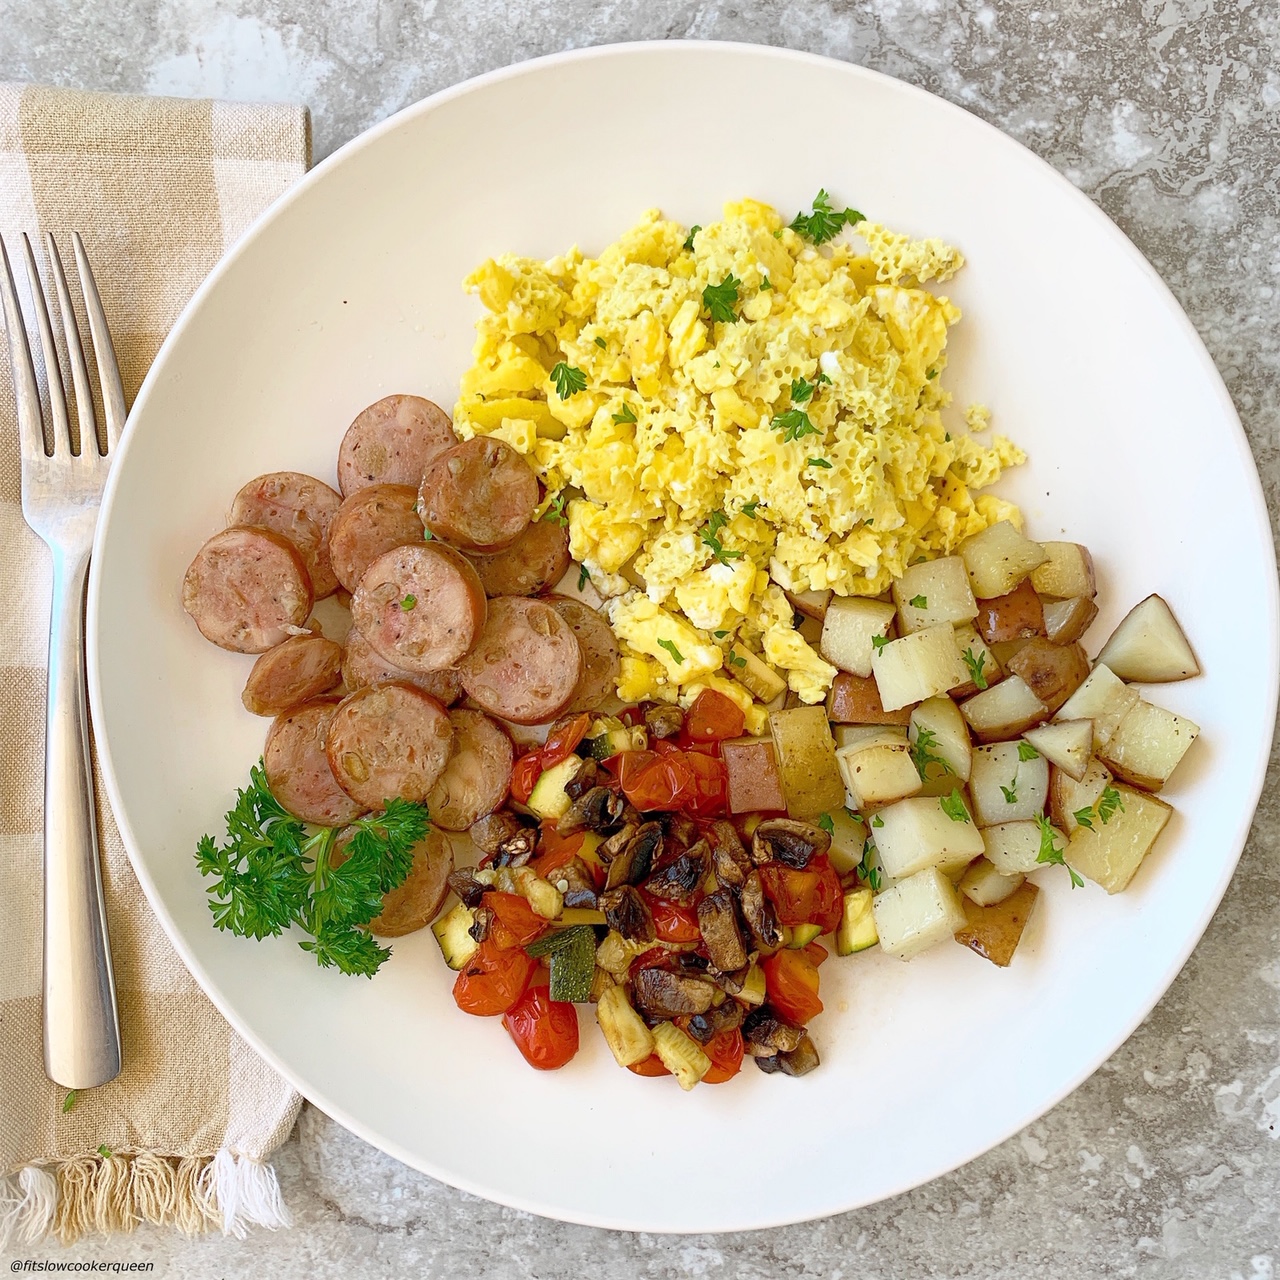 another plated for for Slow Cooker Healthy Fry Up Breakfast (Paleo,Whole30)